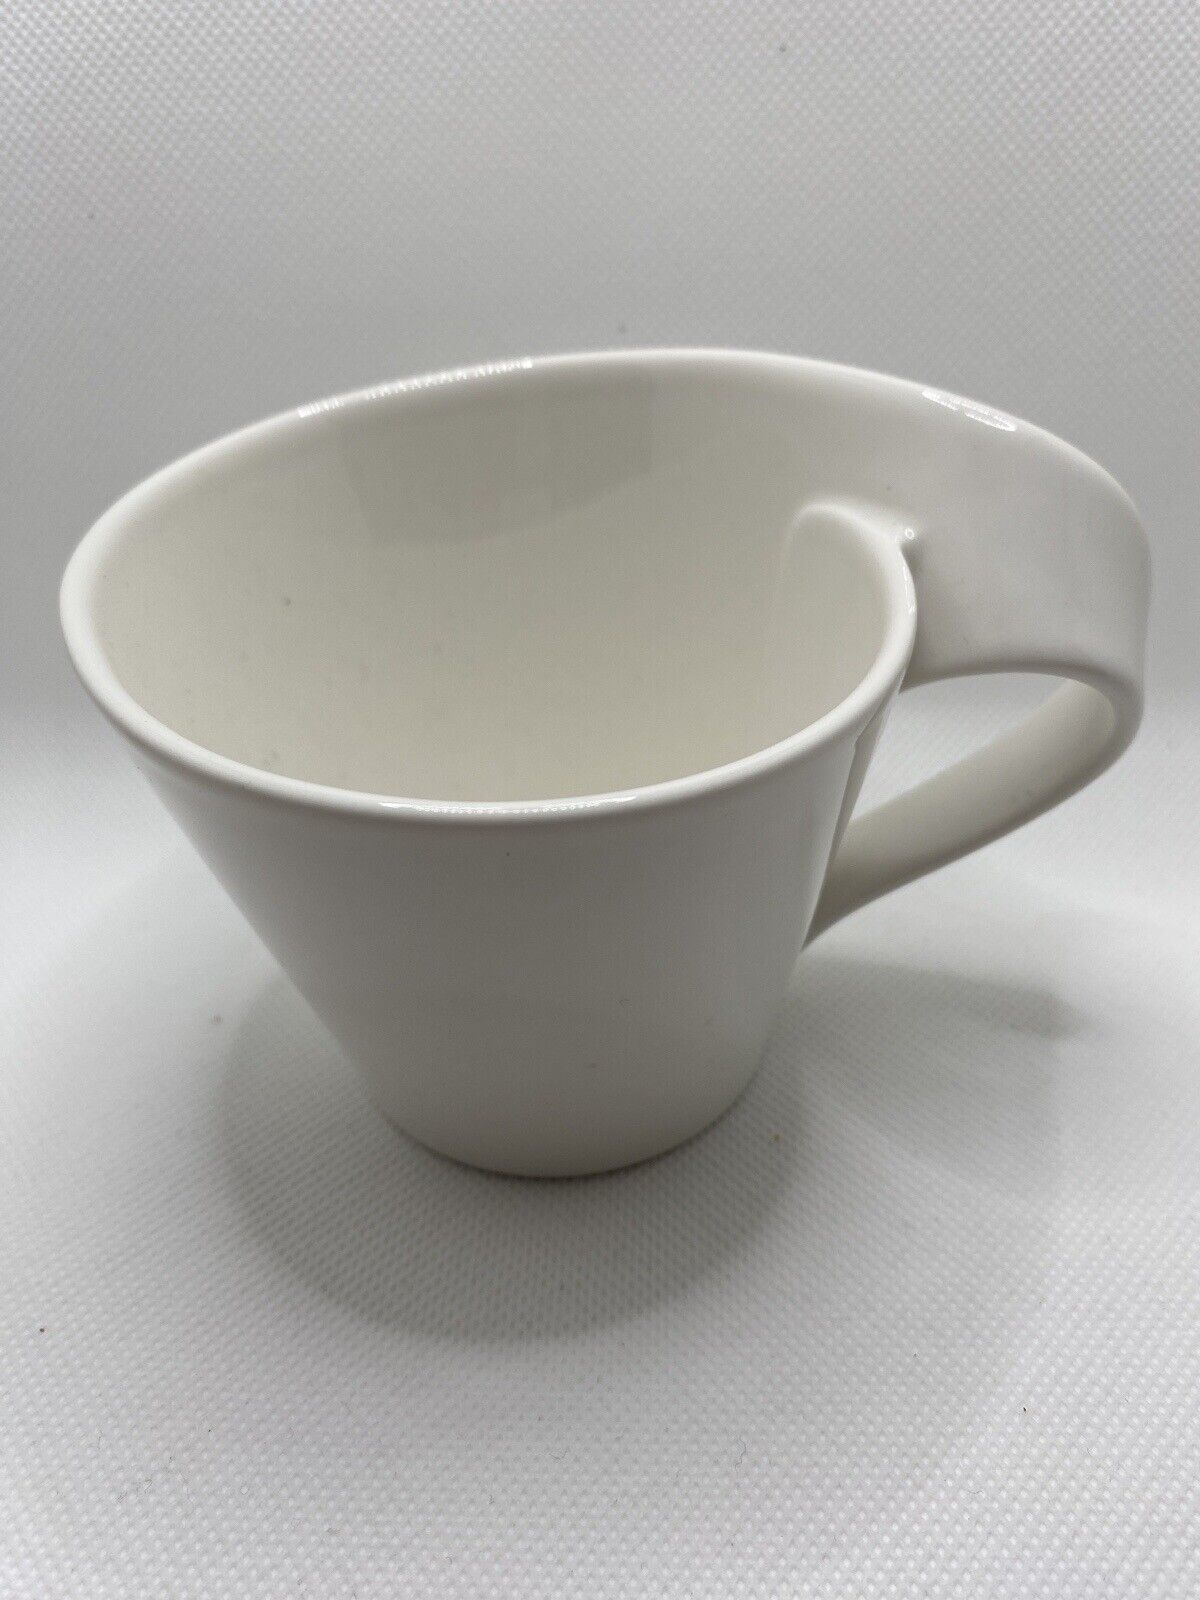 Primary image for Villroy Boch tea cup only Modern New Wave #1748